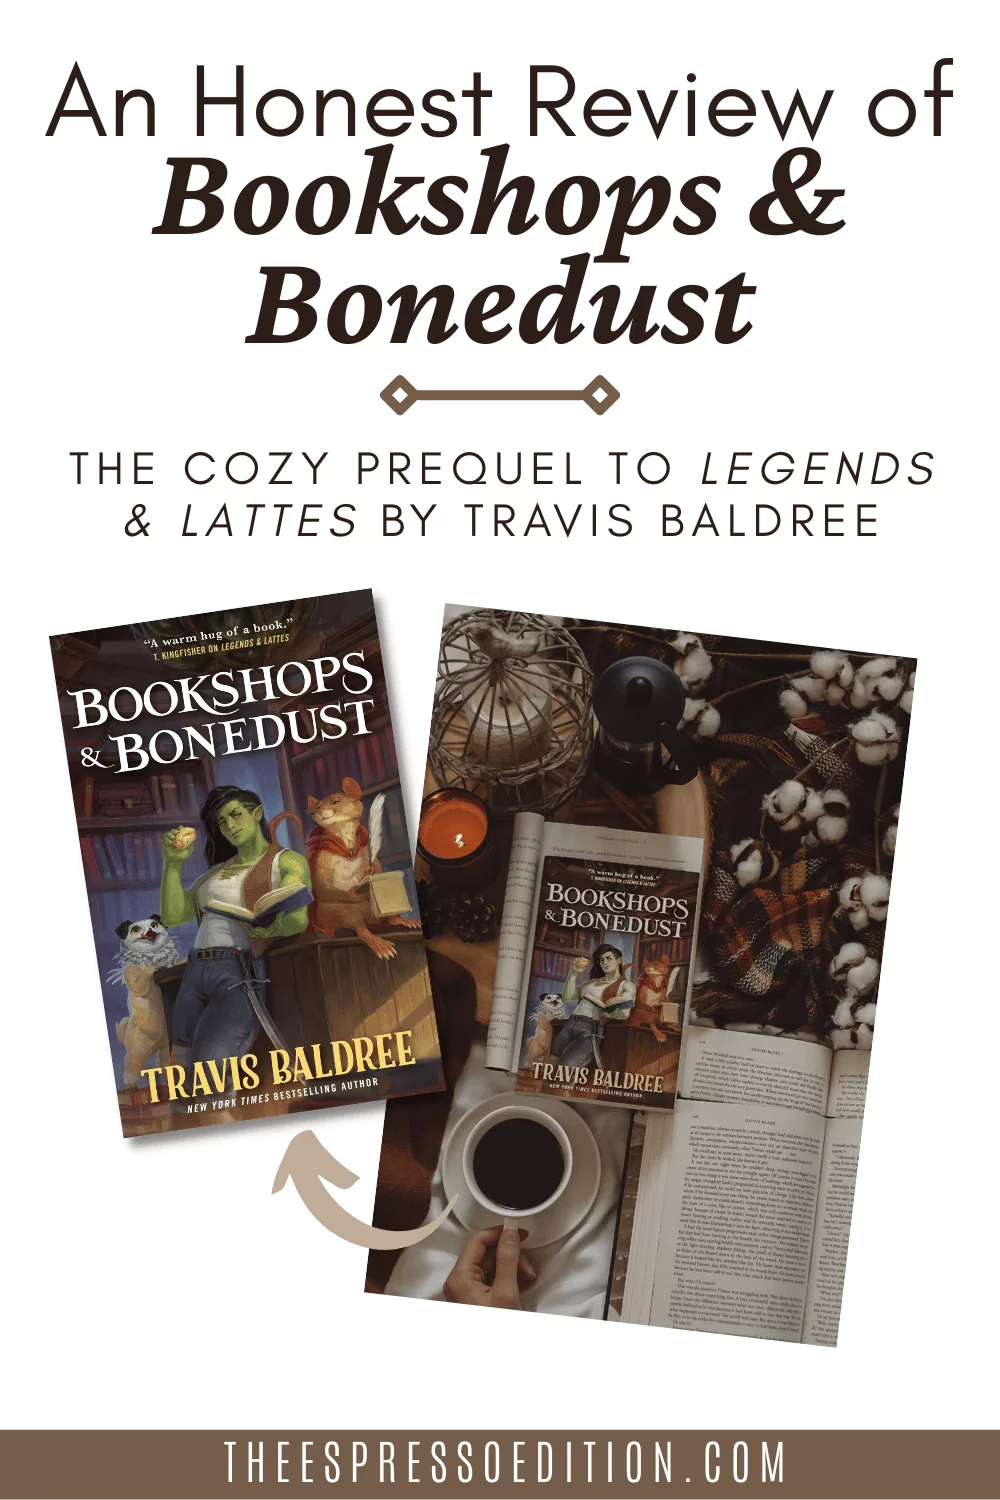 A Review of “Bookshops & Bonedust” by Travis Baldree by The Espresso Edition cozy bookish blog